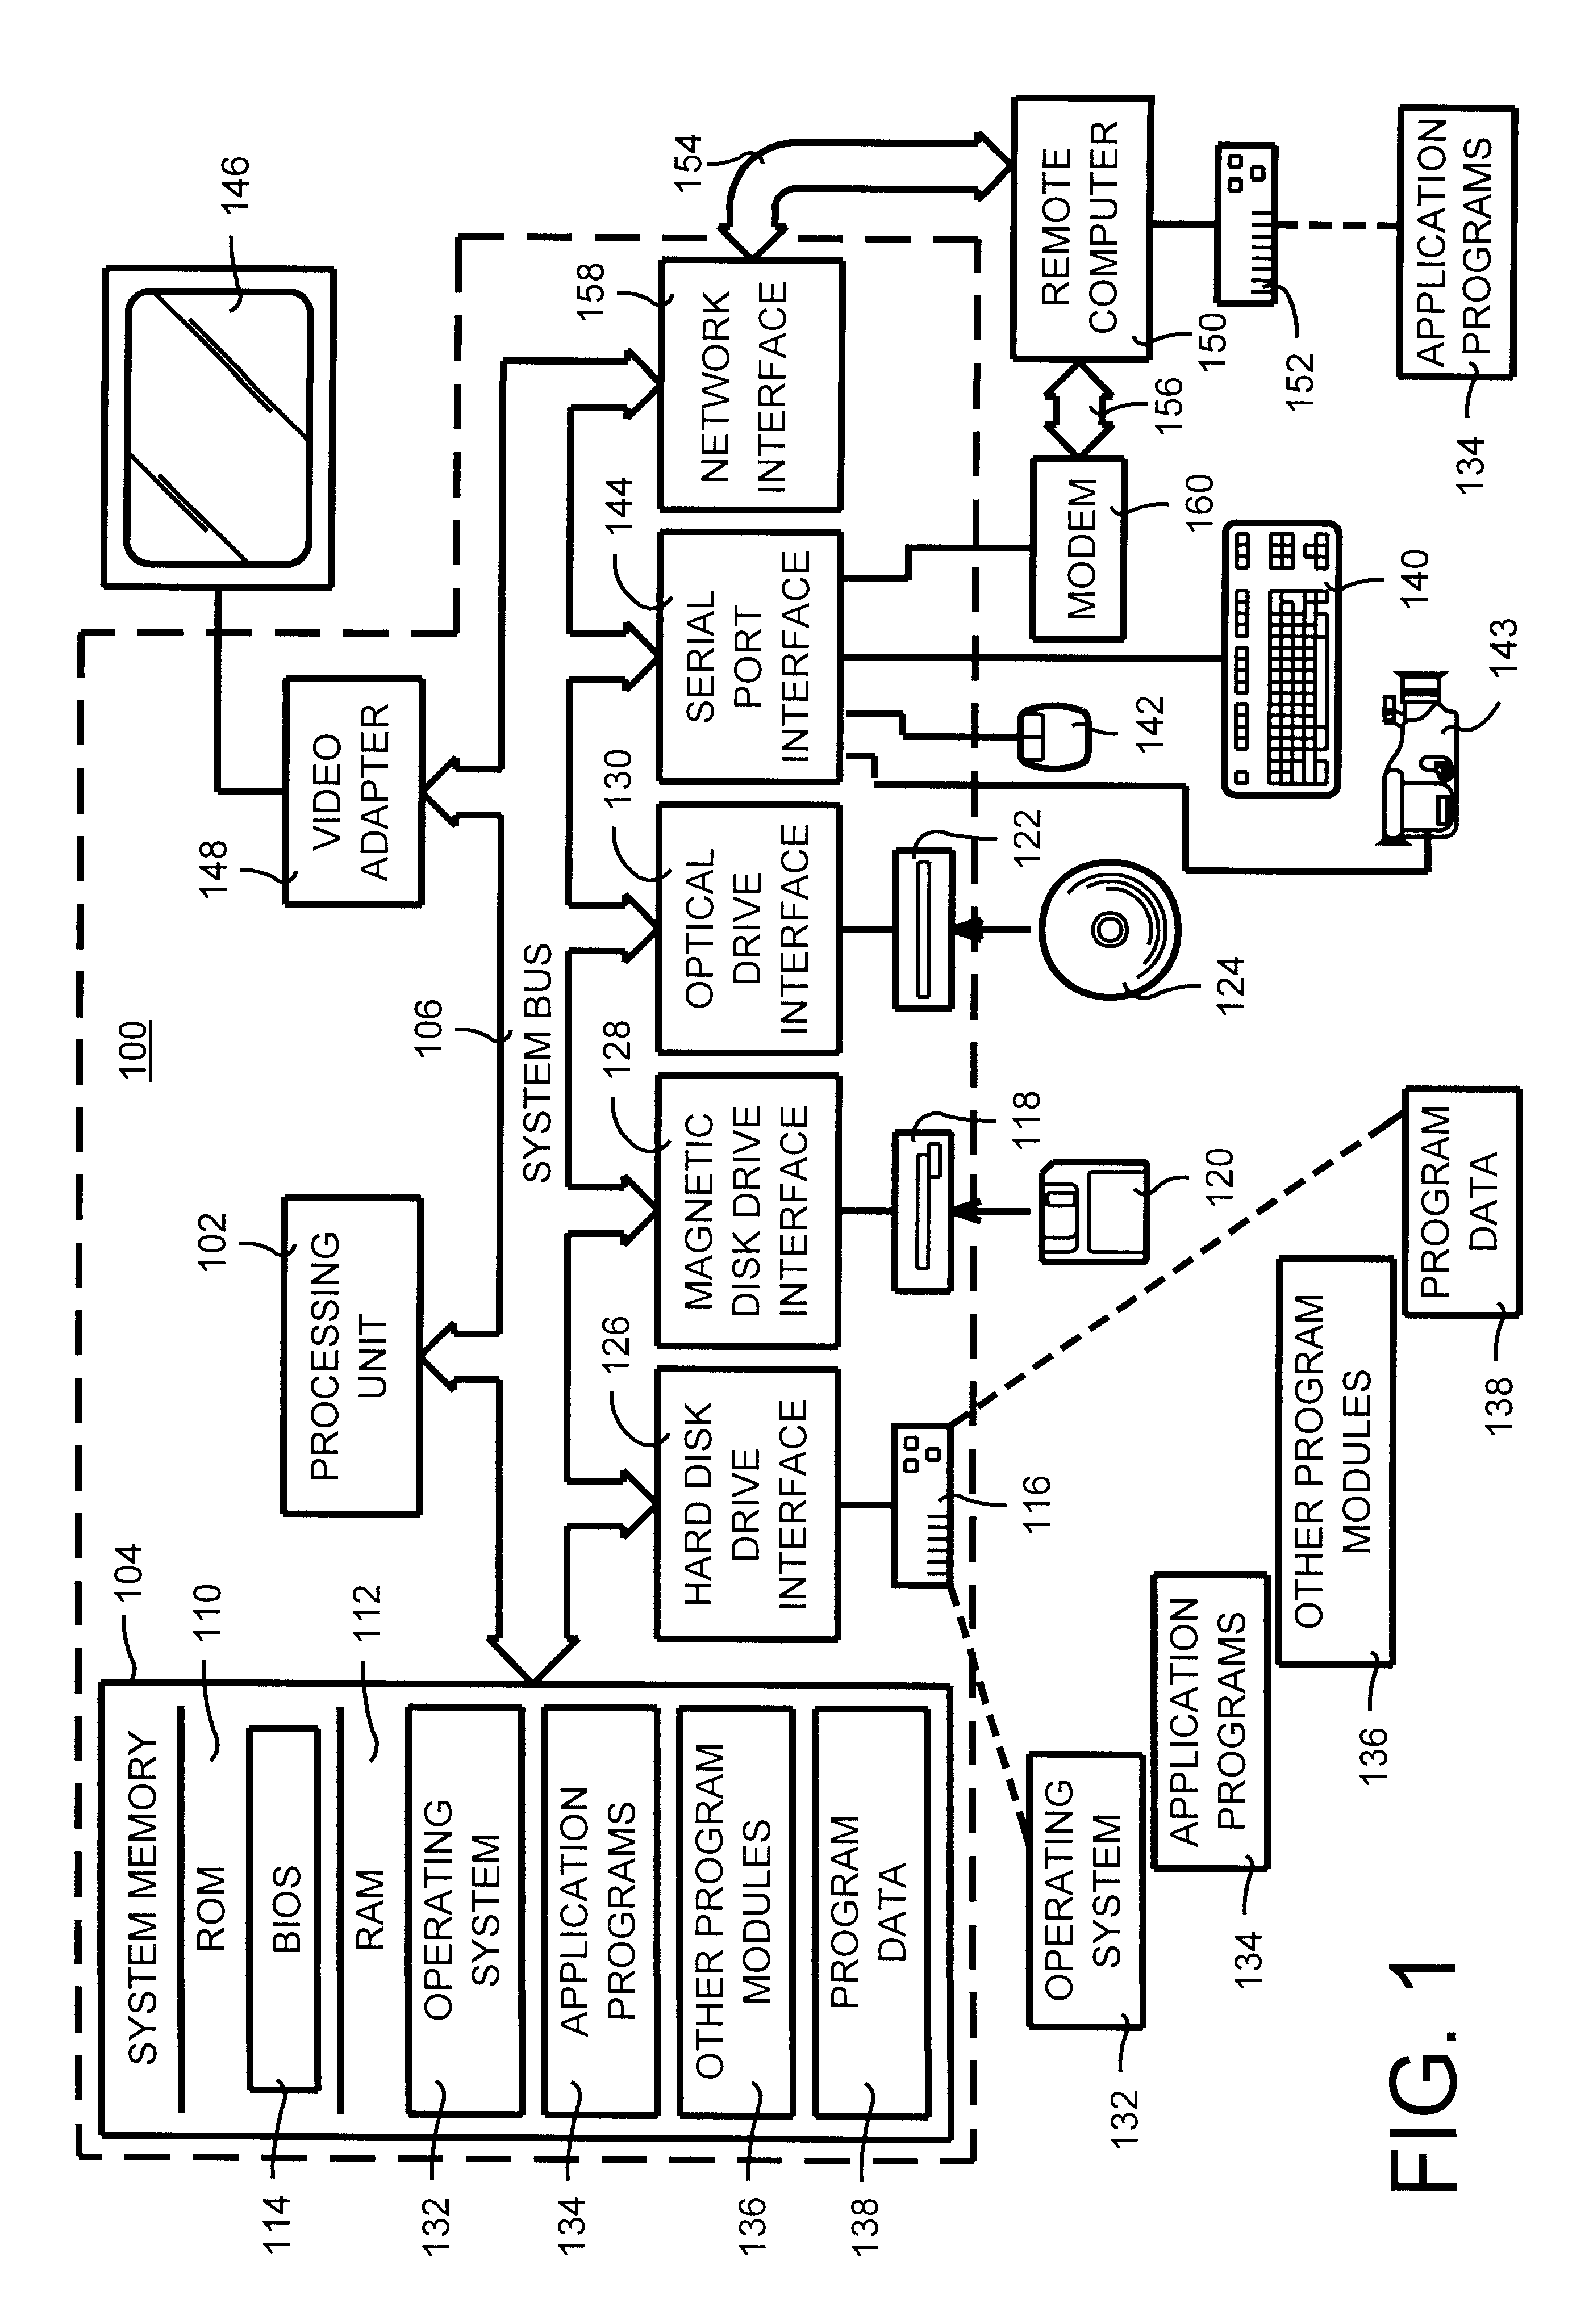 System and method for optically communicating information between a display and a camera